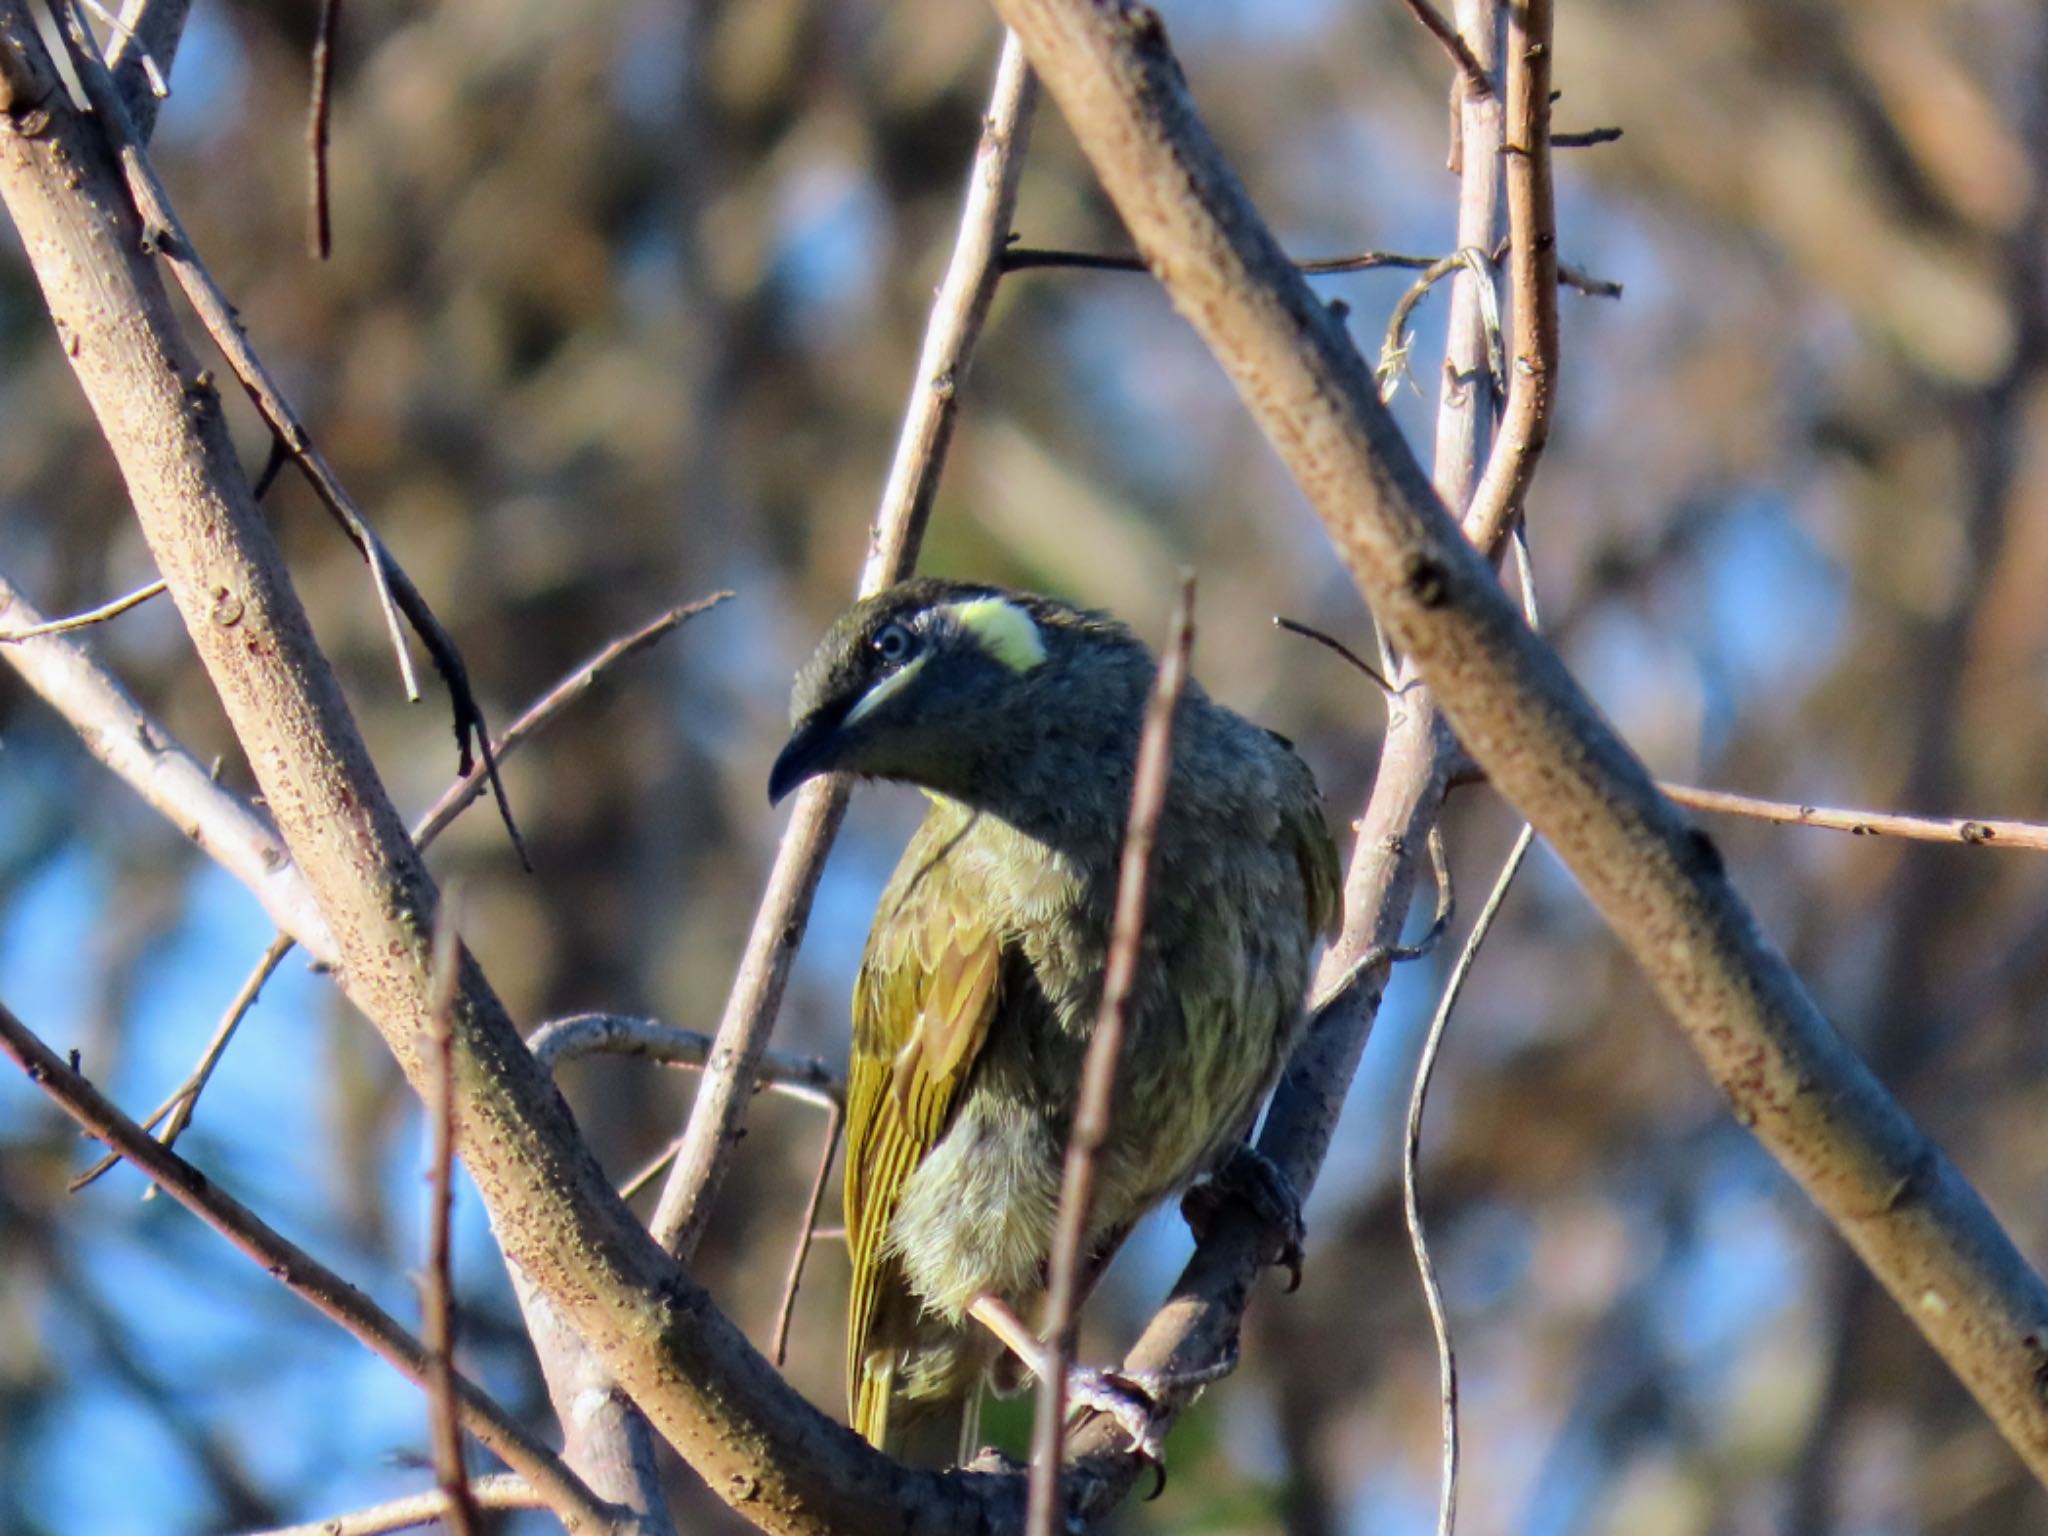 Photo of Lewin's Honeyeater at Oxley Creek Common, Rocklea, QLD, Australia by Maki